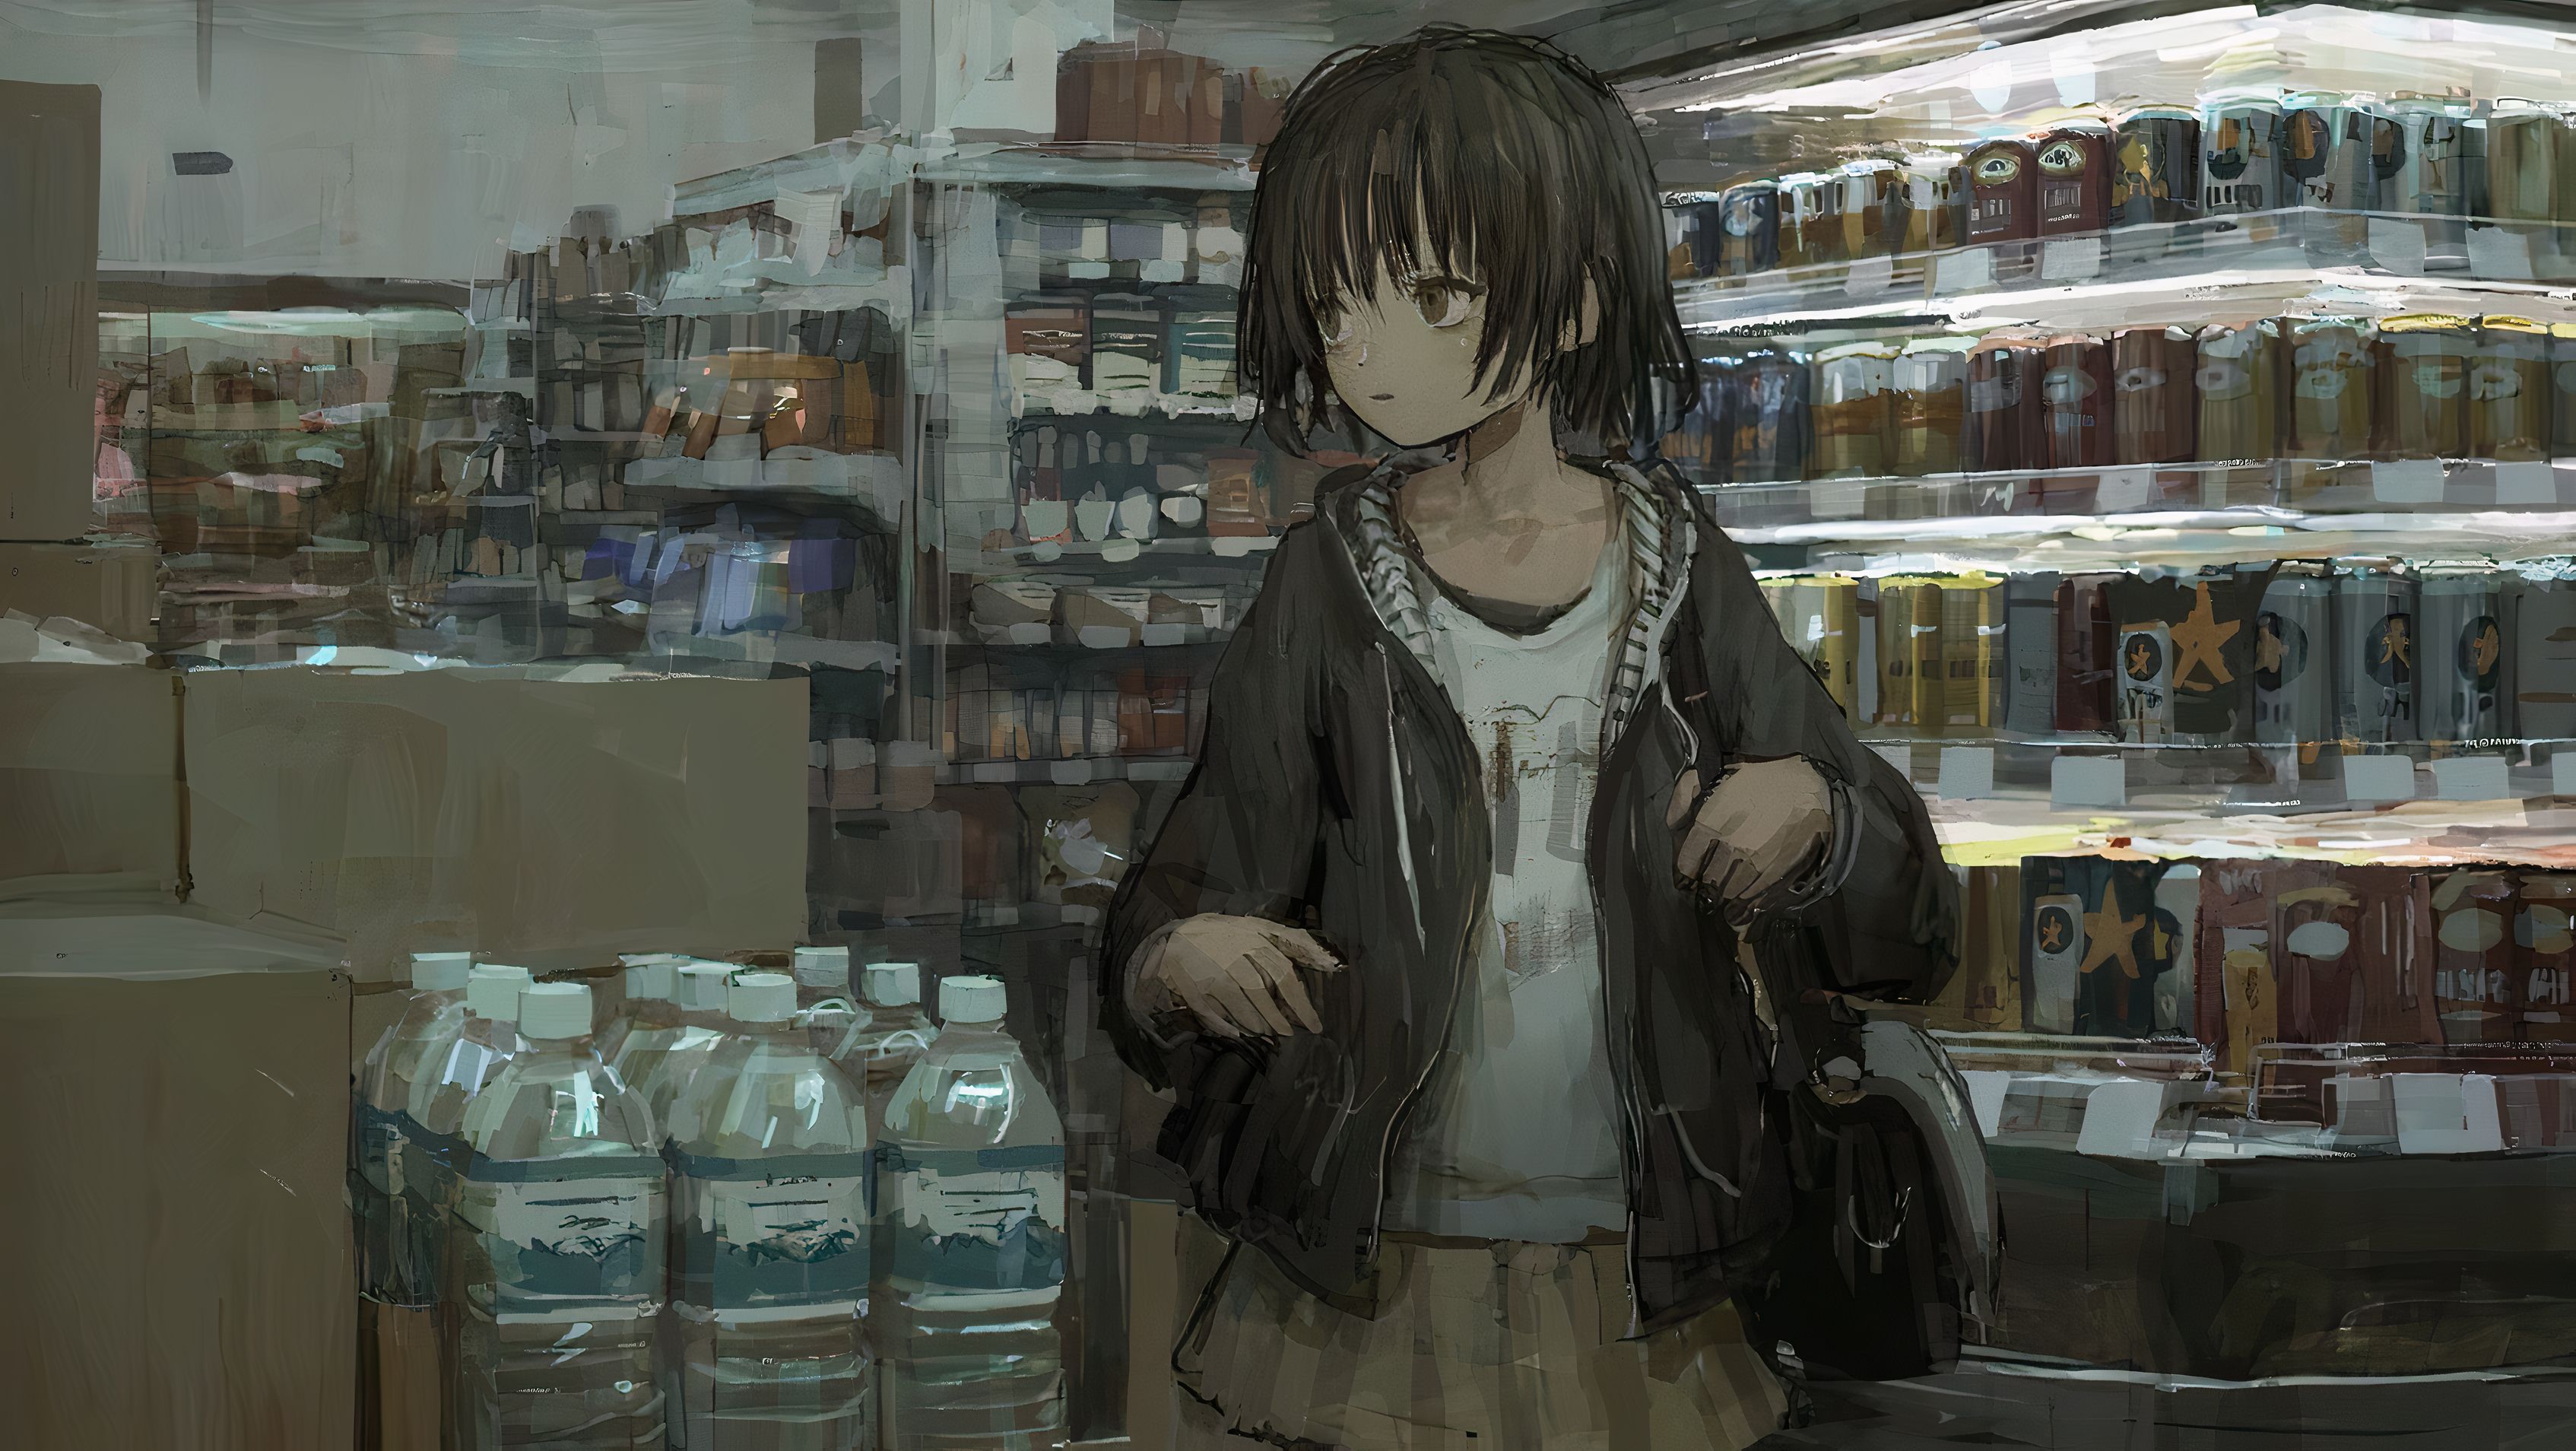 prompthunt: lomography, anime background, a detailed nike shop interior,  glowing, haruhiko mikimoto, hisashi eguchi, lodoss, architectural  perspective, dramatic lighting, displays with detailed shoes and clothes,  sharpened image, yoshinari yoh